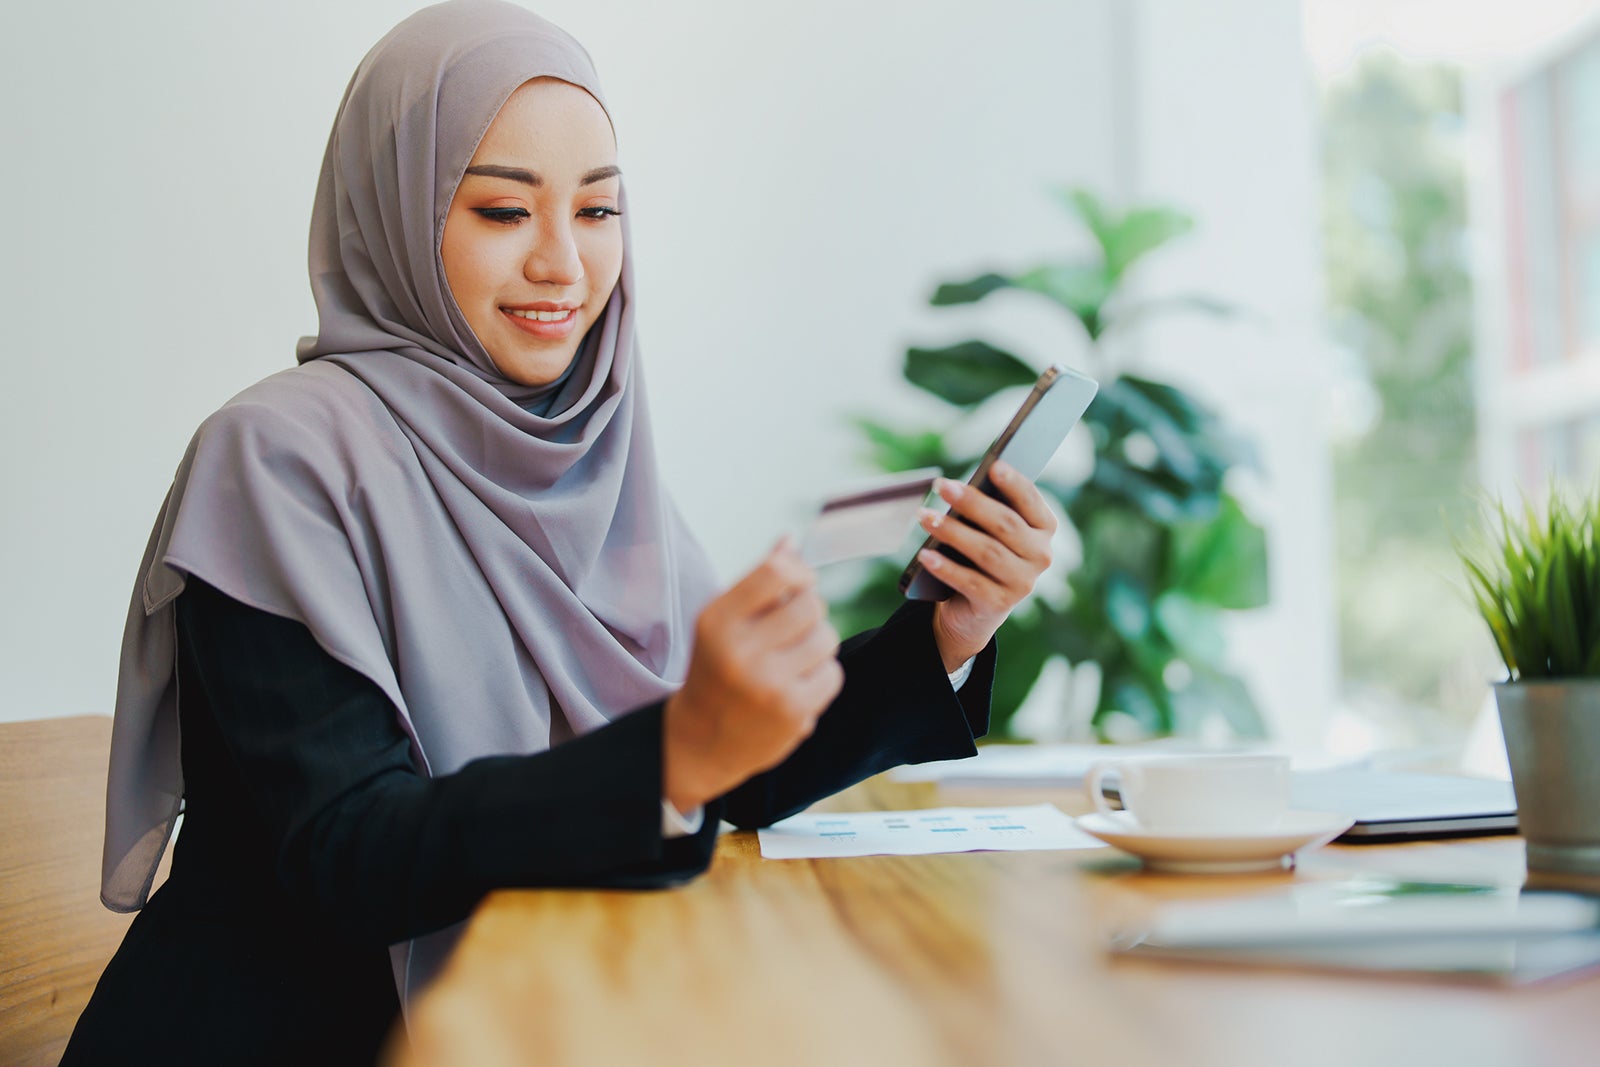 Beautiful Muslim woman shopping online using her phone and credit card